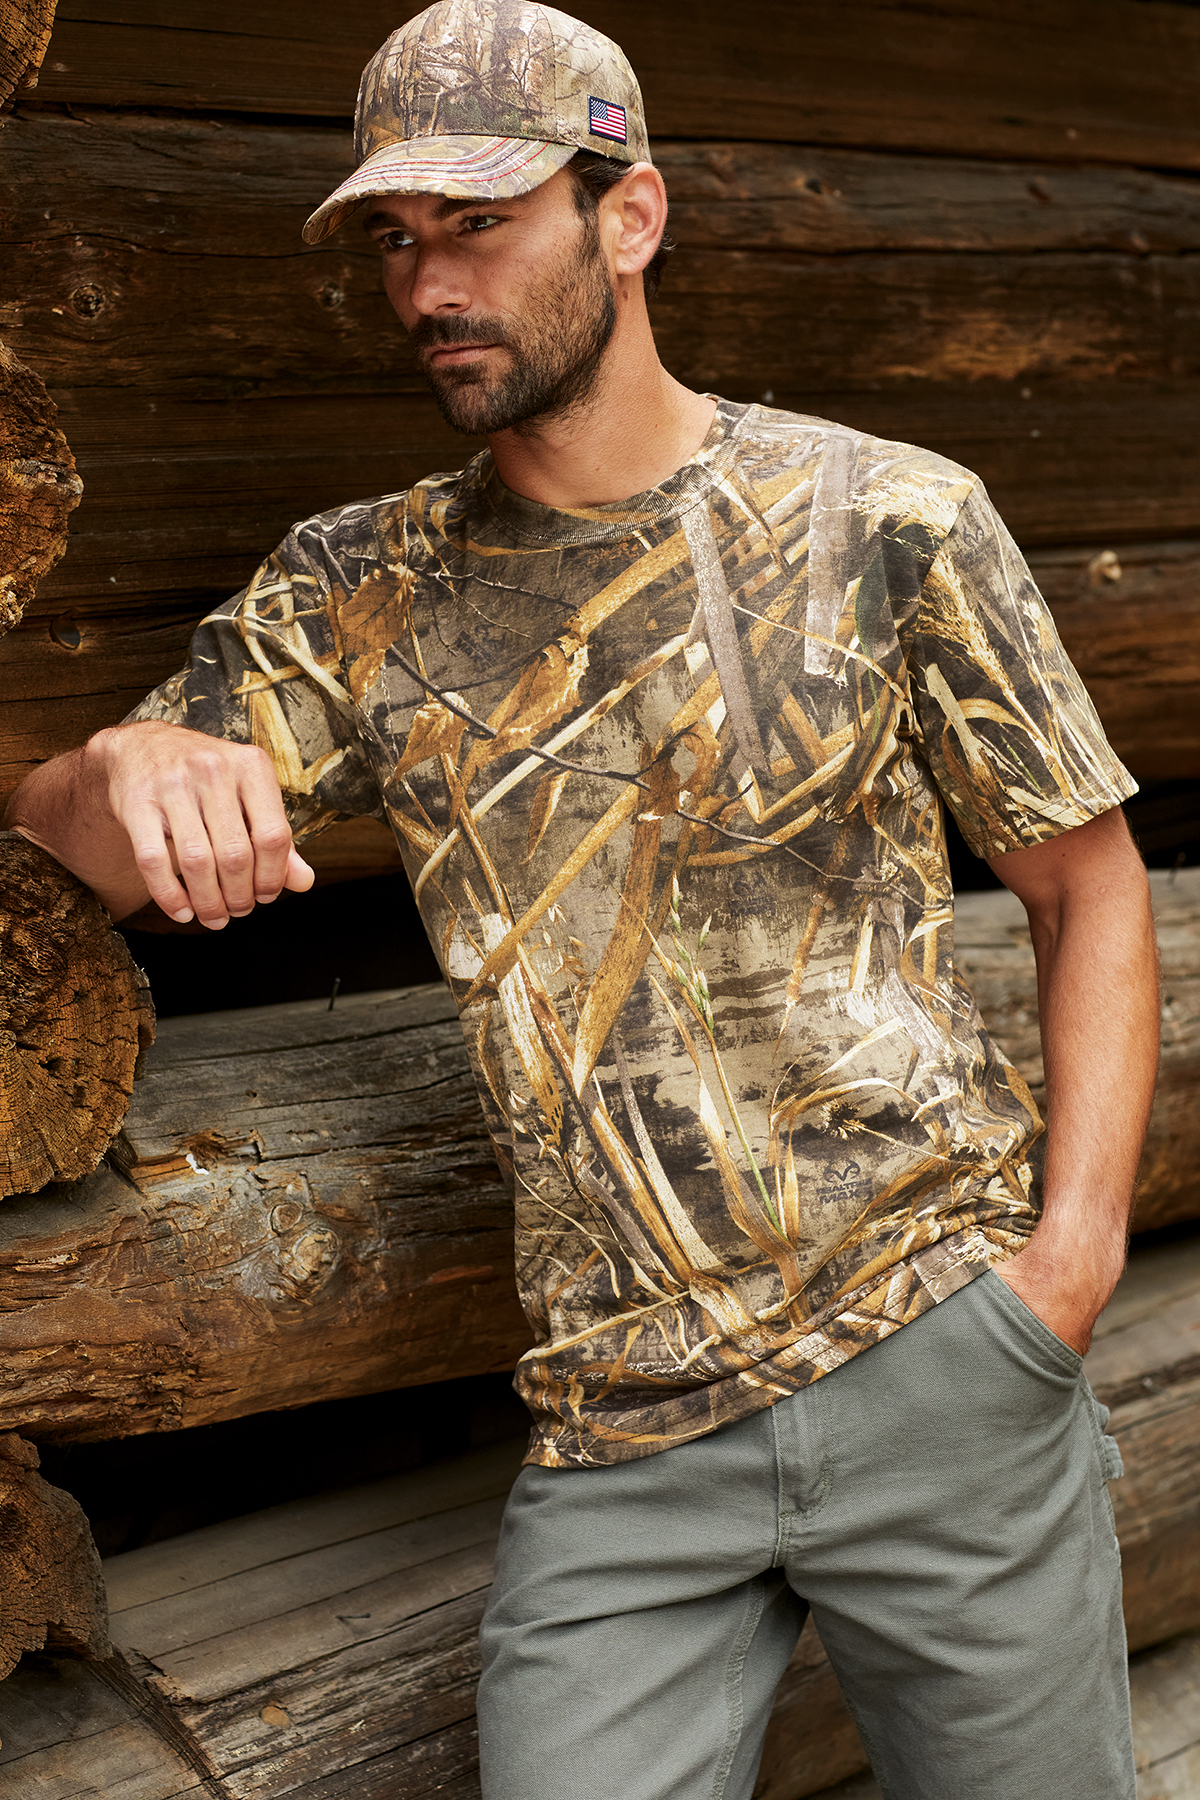 Russell Outdoors - Realtree Explorer 100% Cotton T-Shirt - NP0021R - Realtree Xtra, 2XL